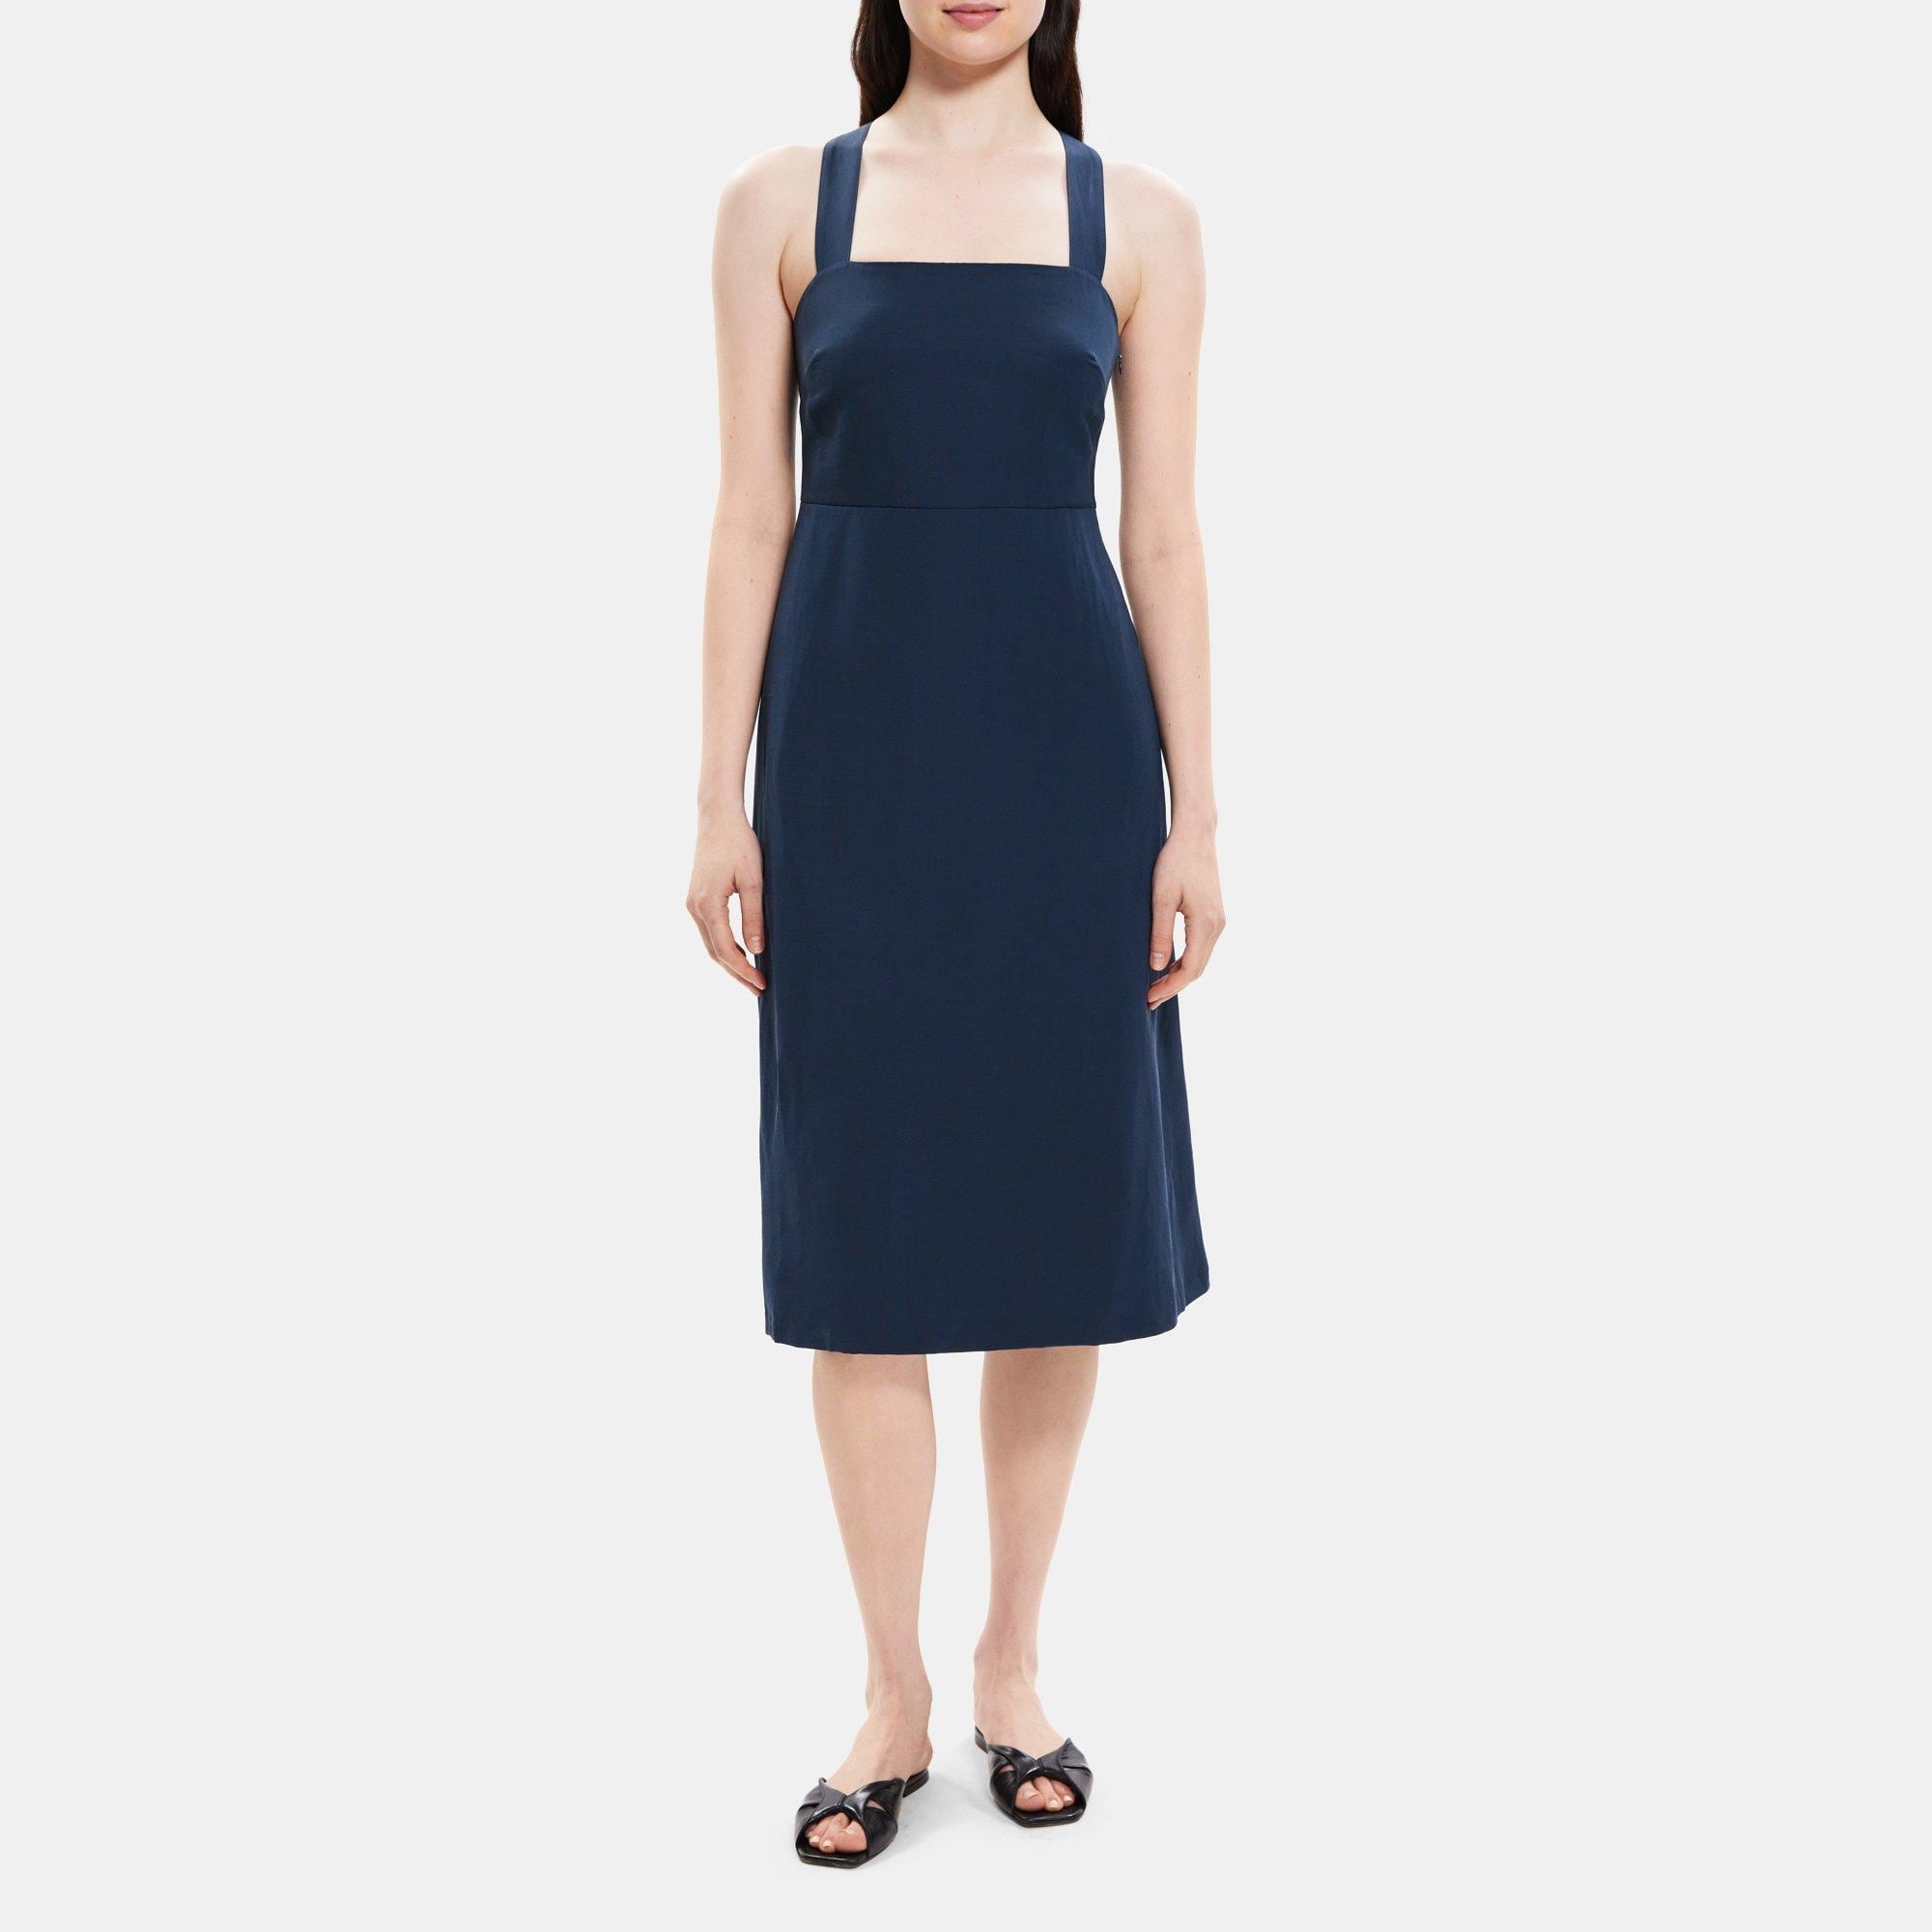 Theory Crossback Dress in Linen-Blend